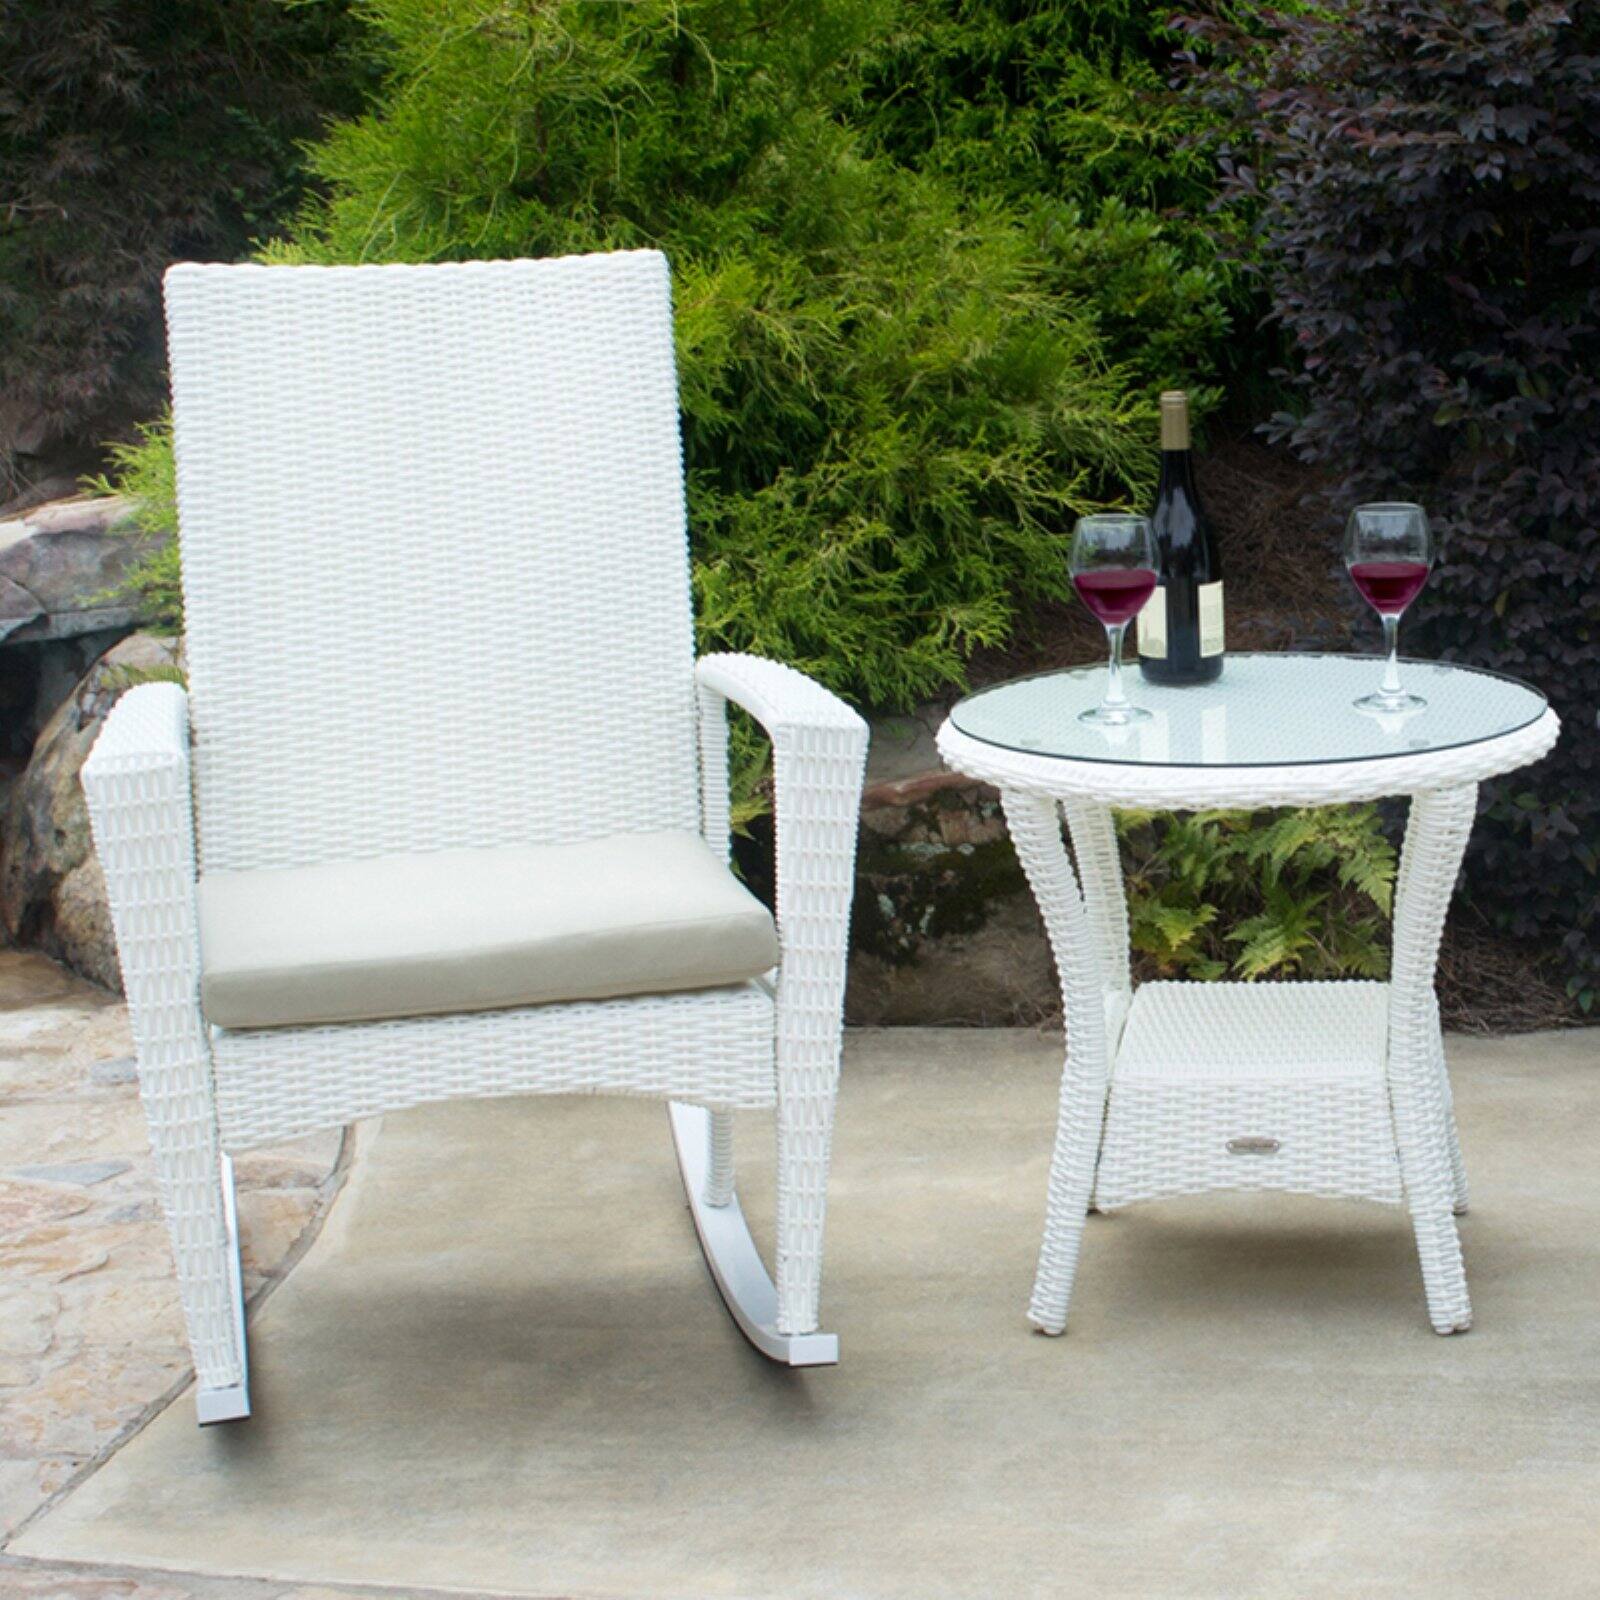 Tortuga Outdoor Bayview Rocking Chair and Side Table - image 5 of 5